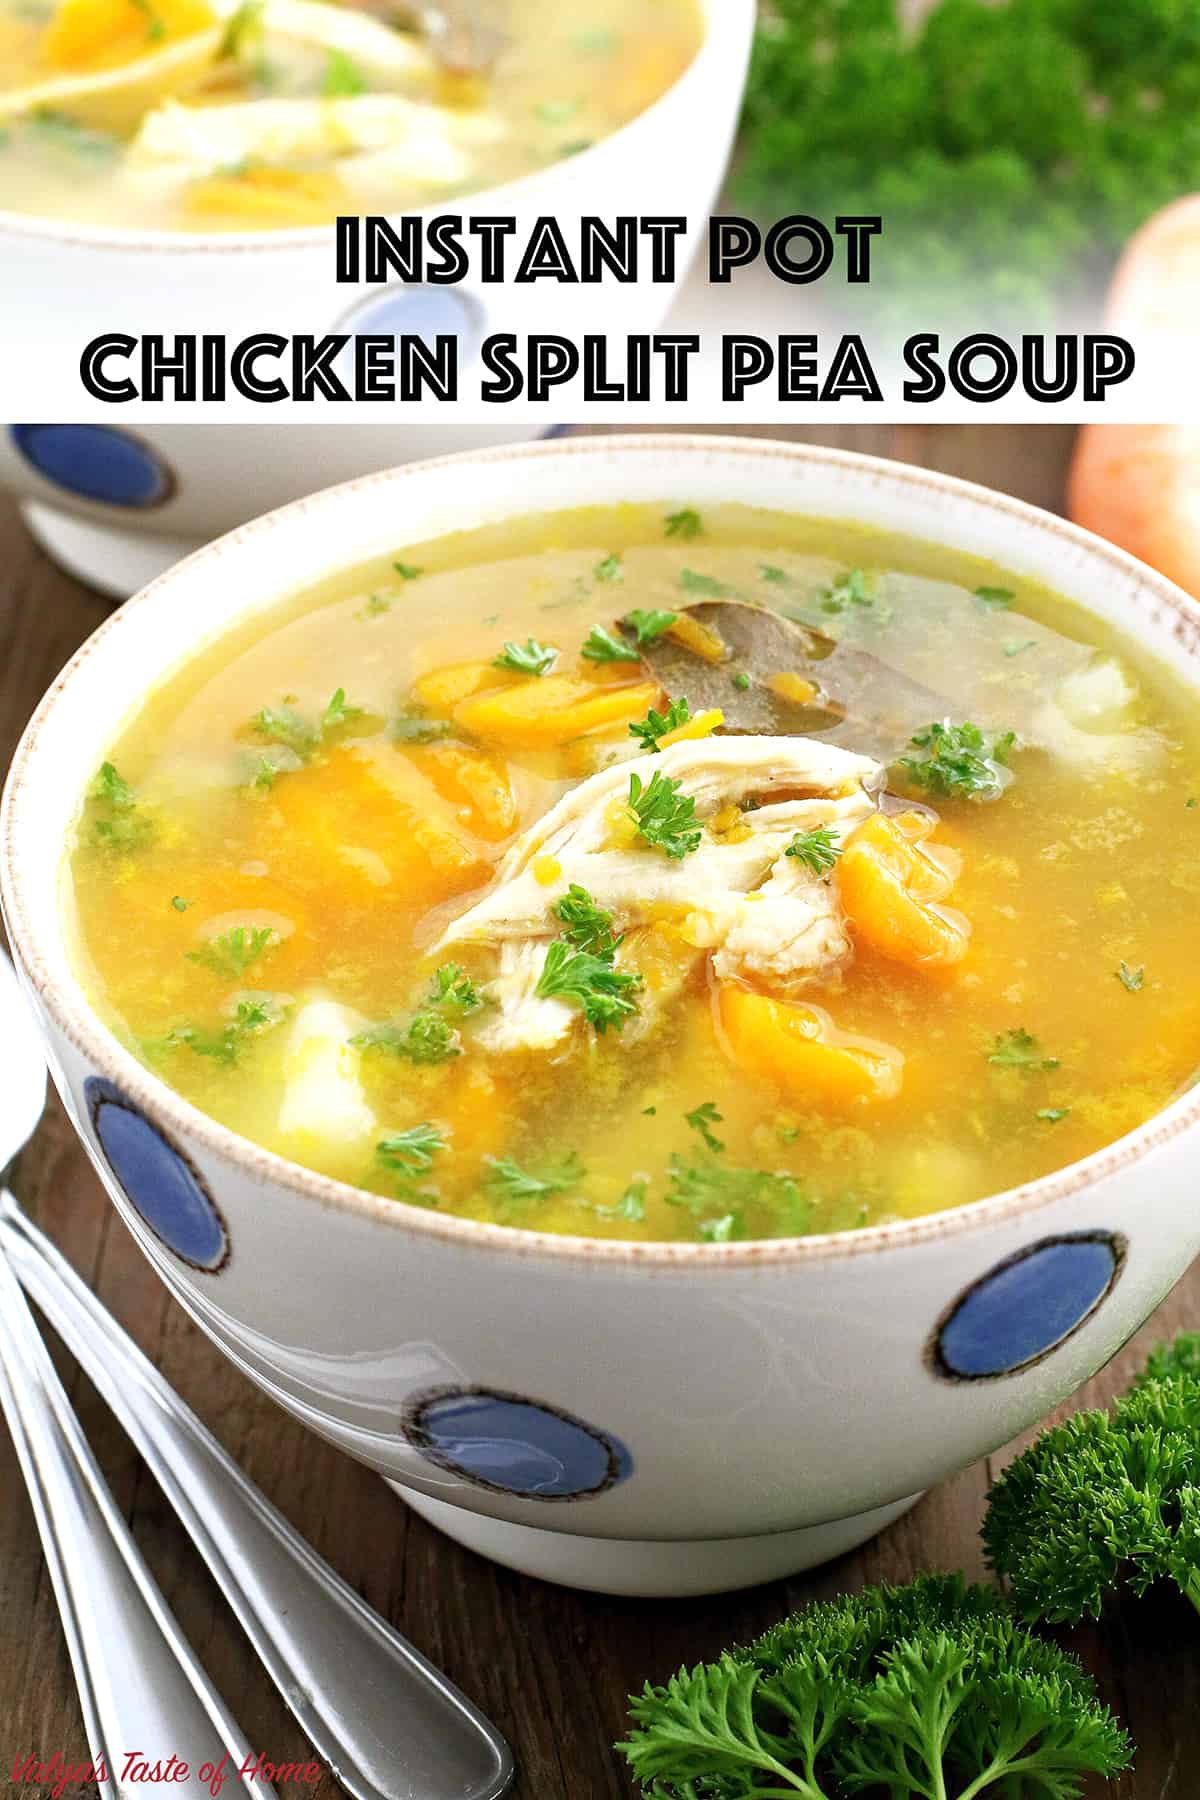 This Instant Pot Chicken Split Pea Soup Recipe is unique and fantastic. It's light but also tastes rich and satisfying. It will also do a great job of keeping chills at bay and make you feel all warm and cozy inside.